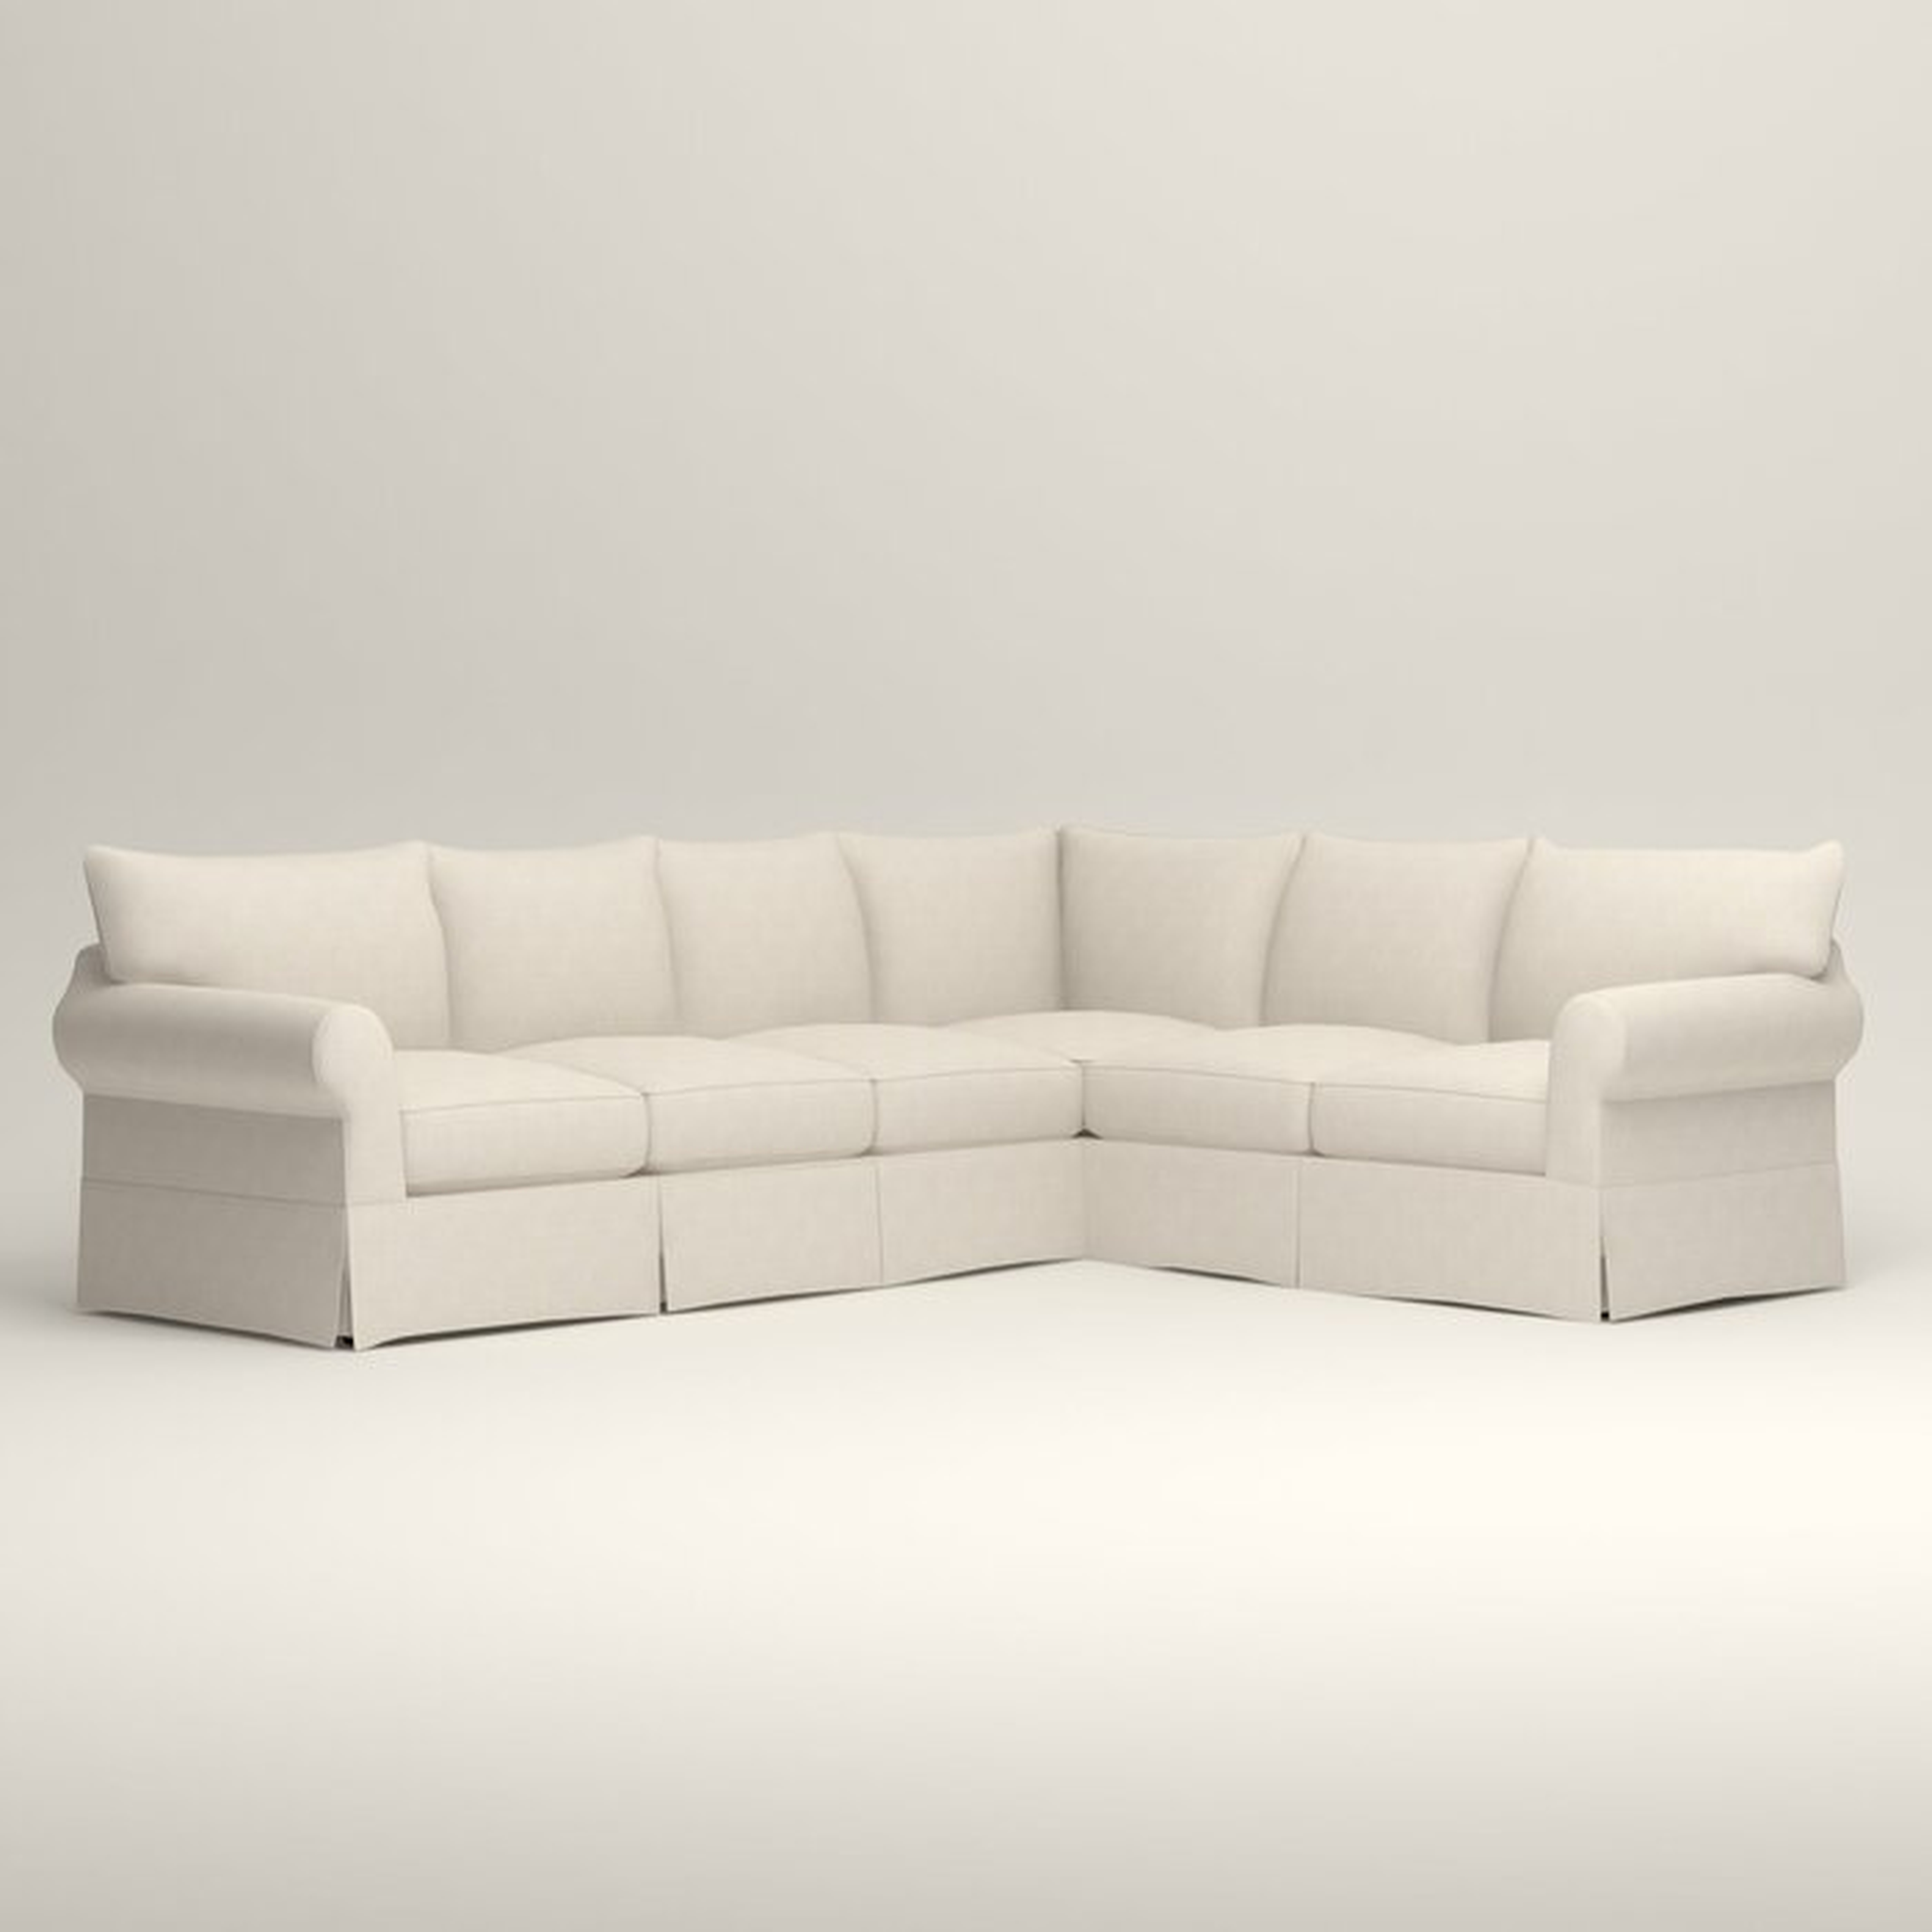 Jameson Slipcovered L-Shaped Sectional - Right Facing - Classic Bleach White - Birch Lane